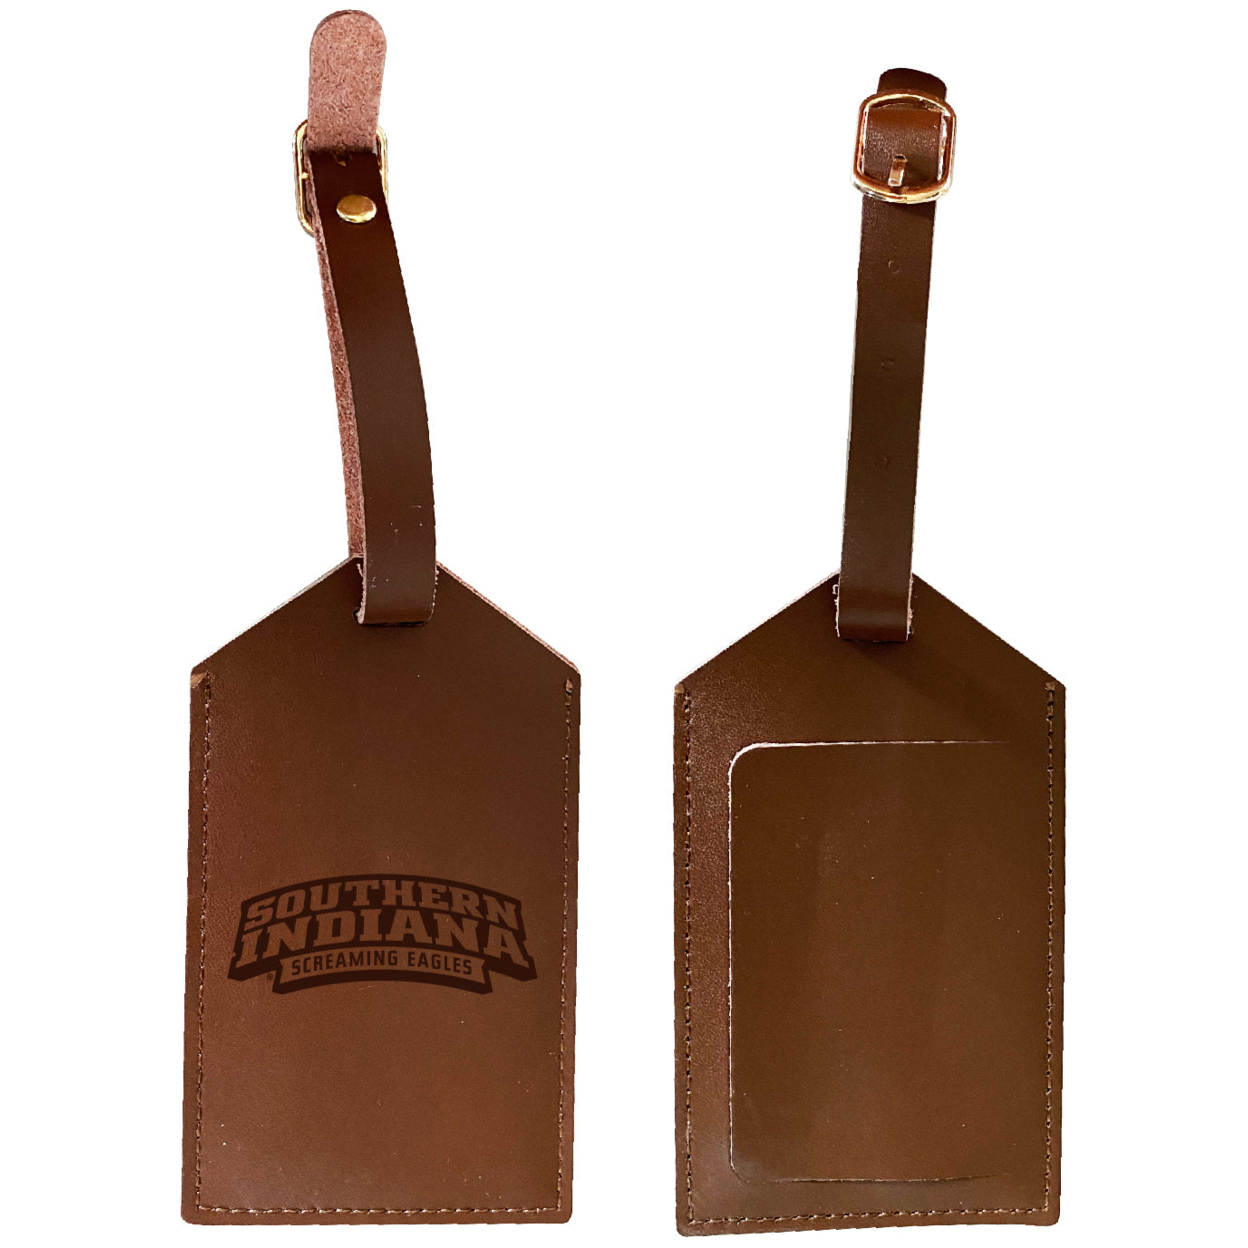 University Of Southern Indiana Leather Luggage Tag Engraved